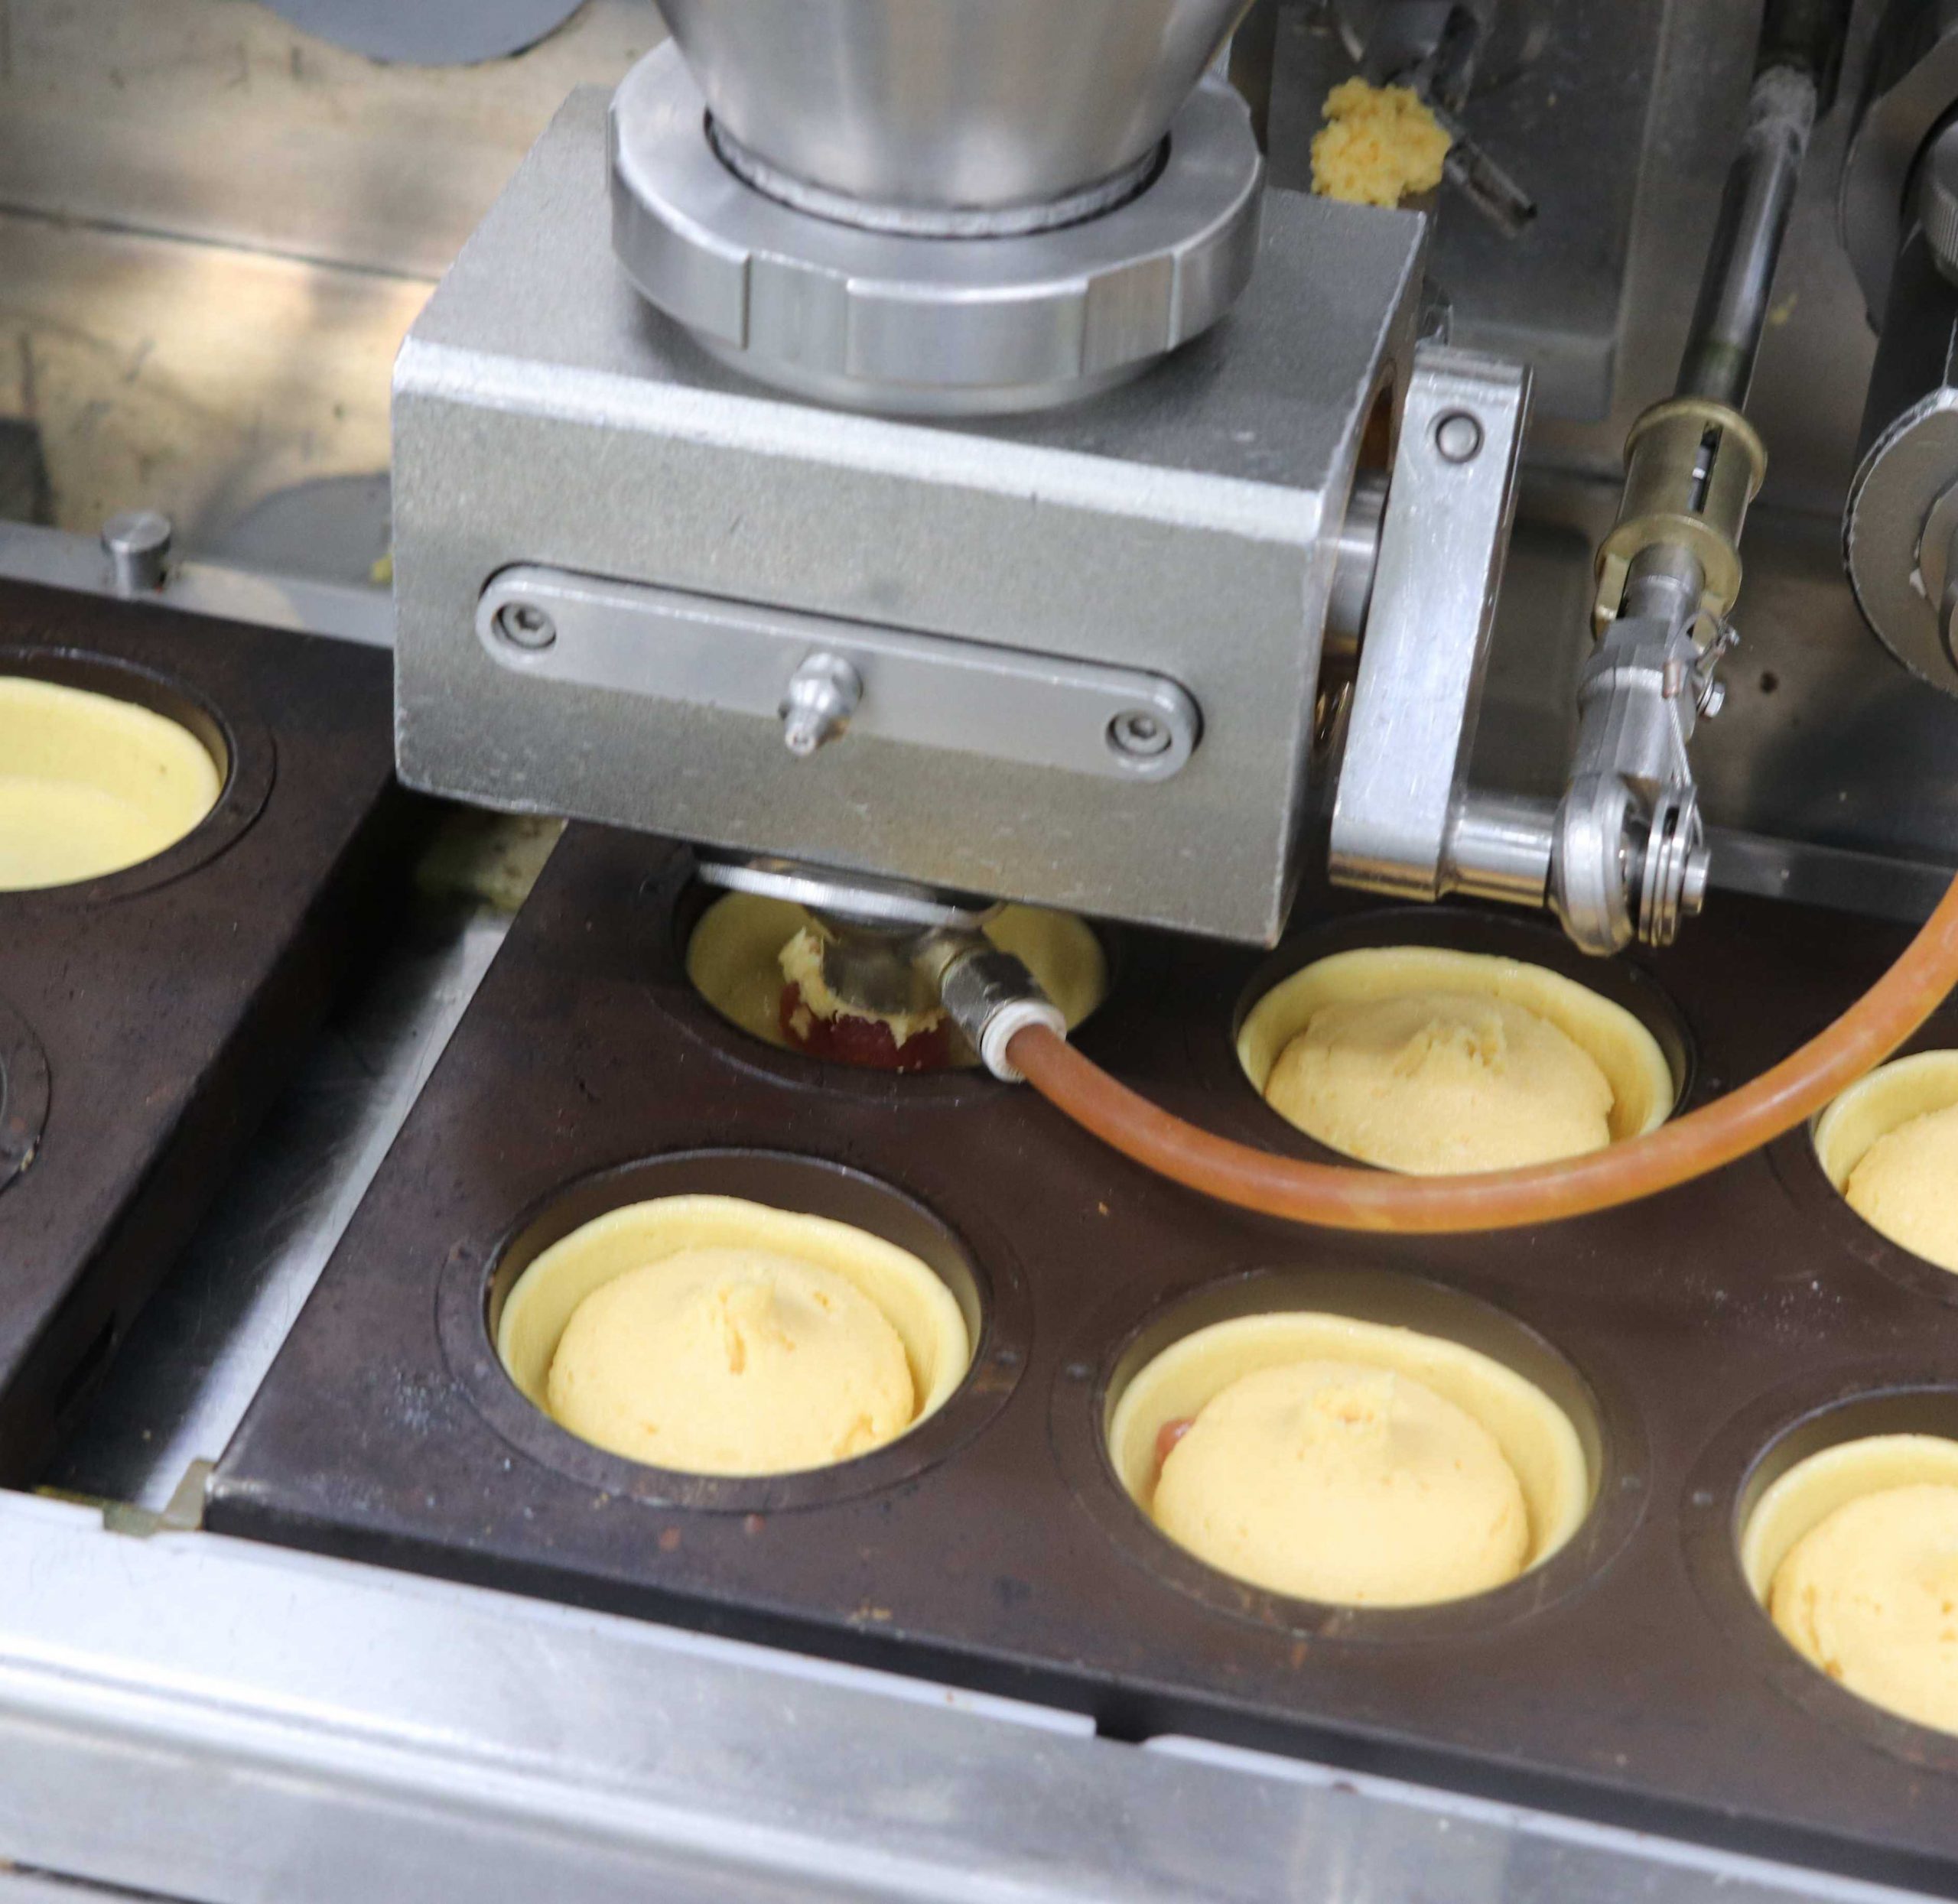 At the 3rd head, the filling batter and kanpyo jam is deposited at the same time.